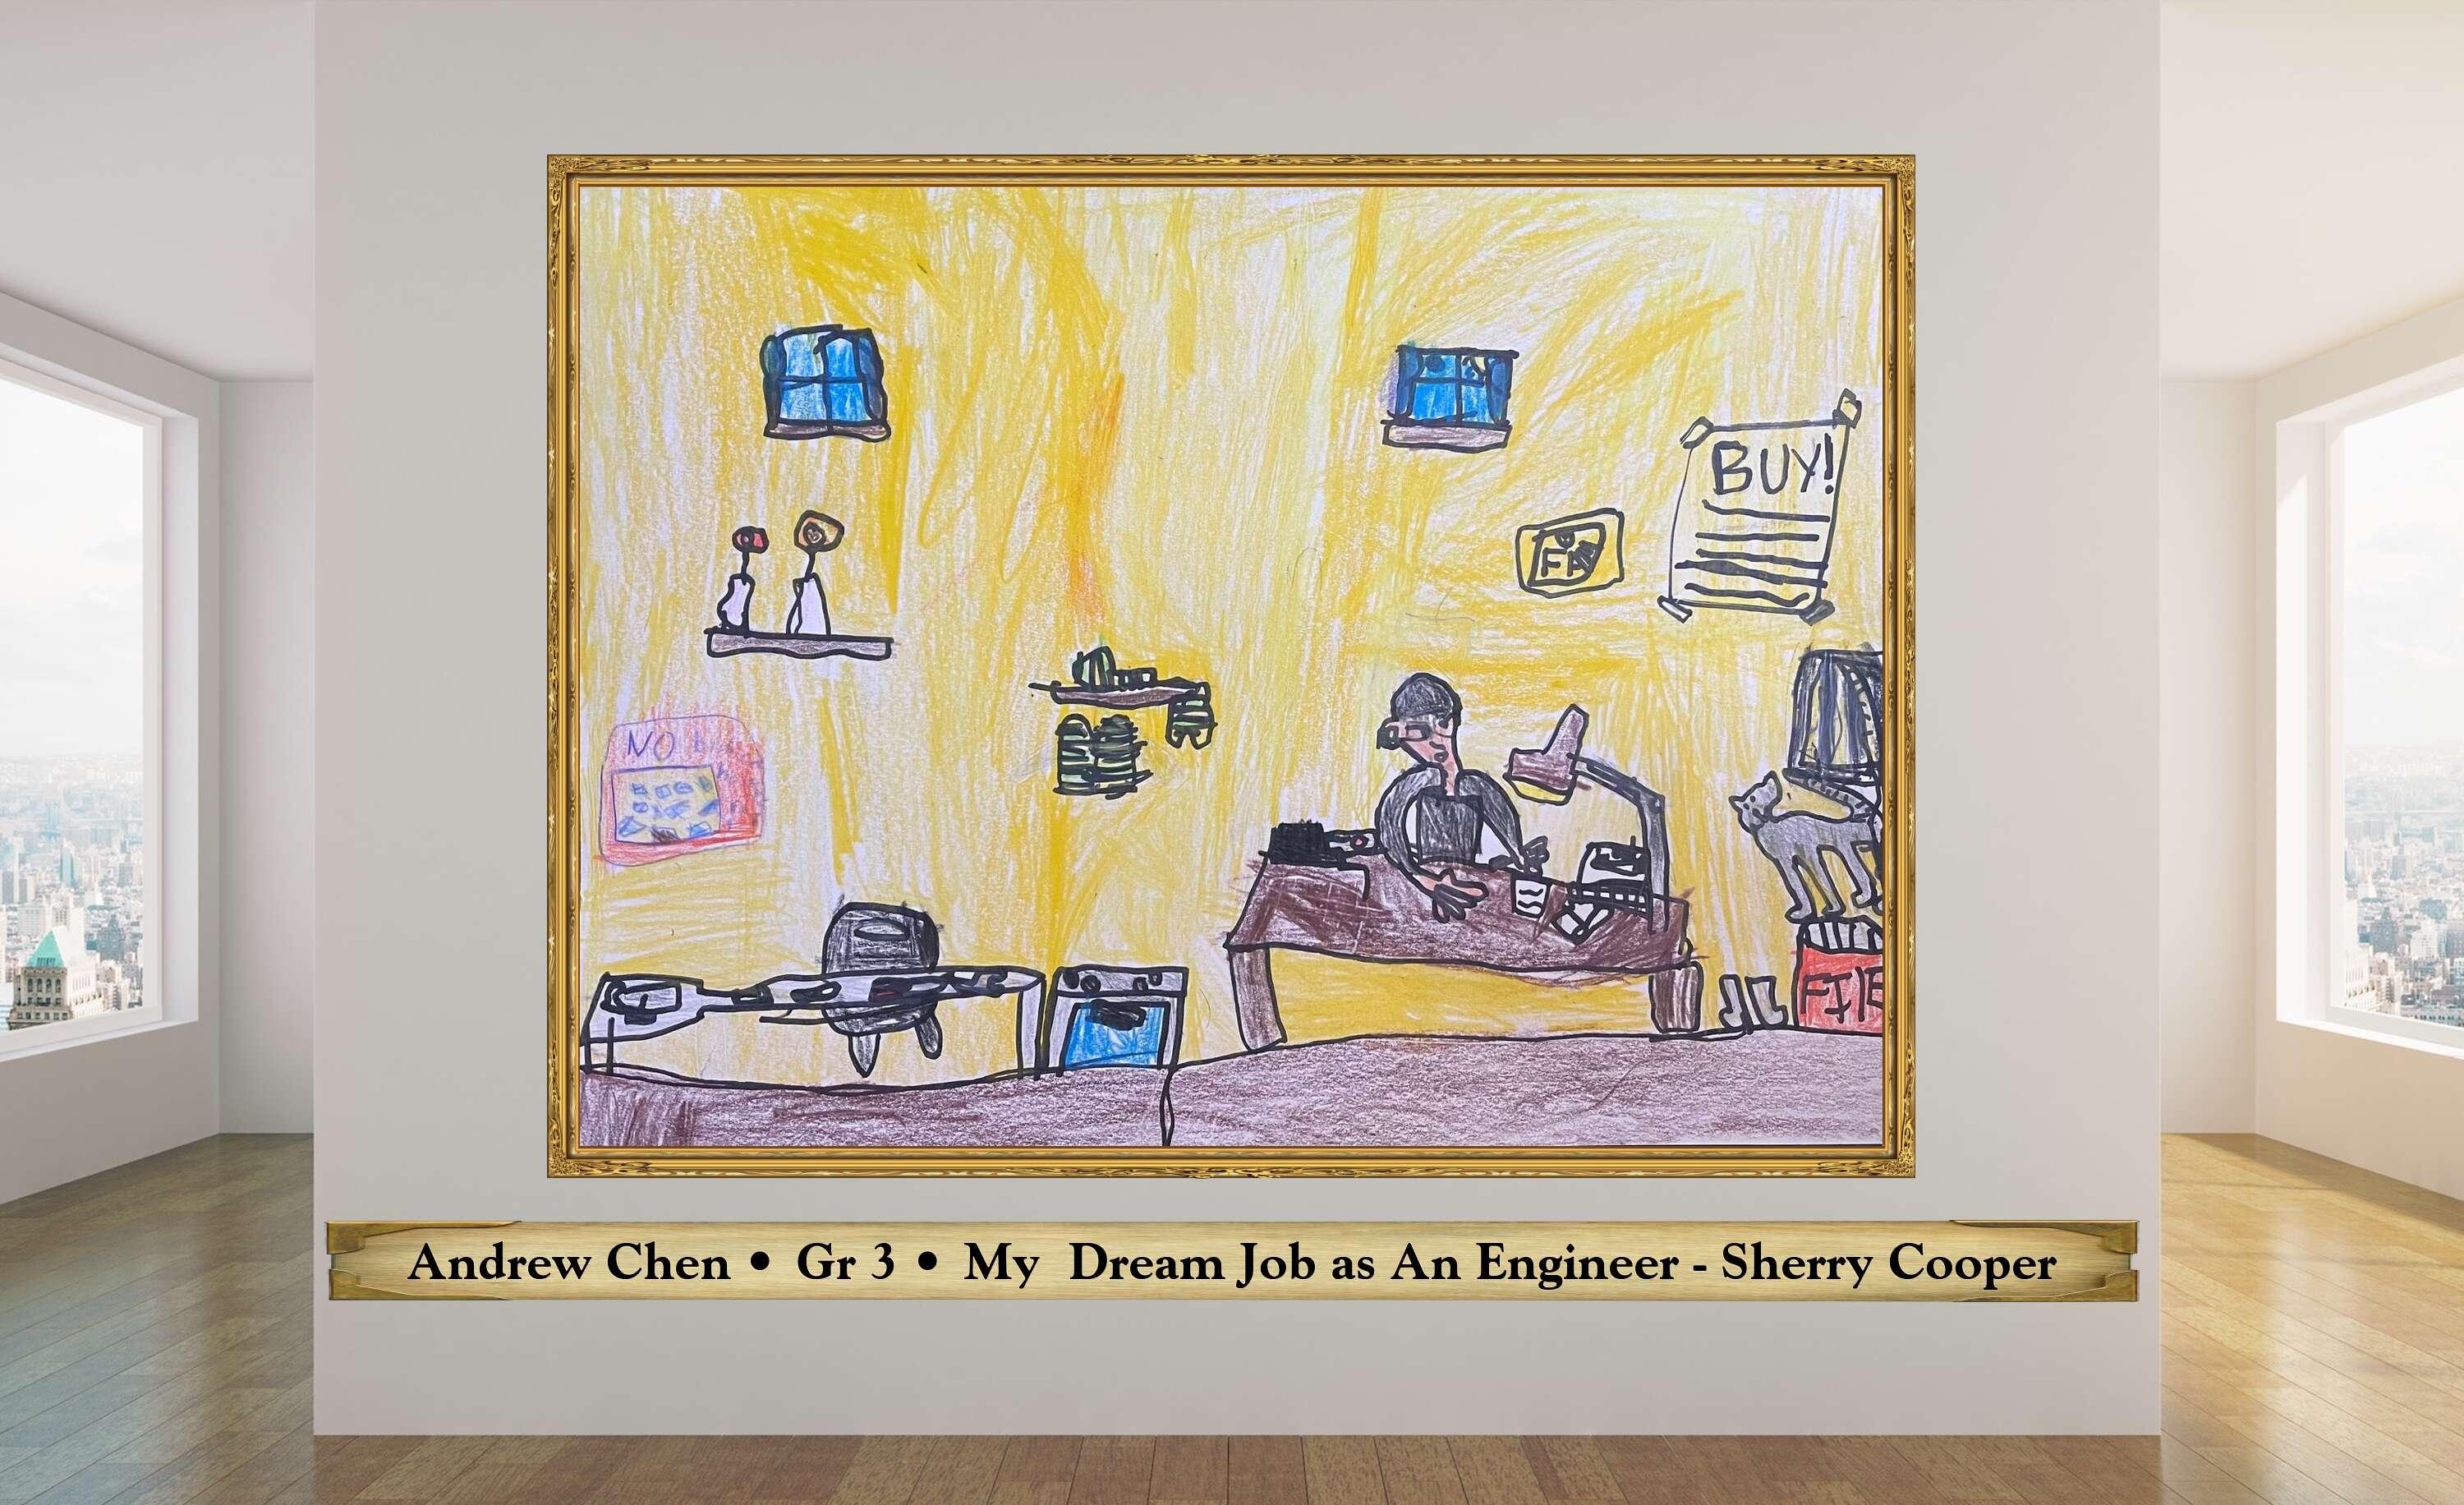 Andrew Chen • Gr 3 • My  Dream Job as An Engineer - Sherry Cooper